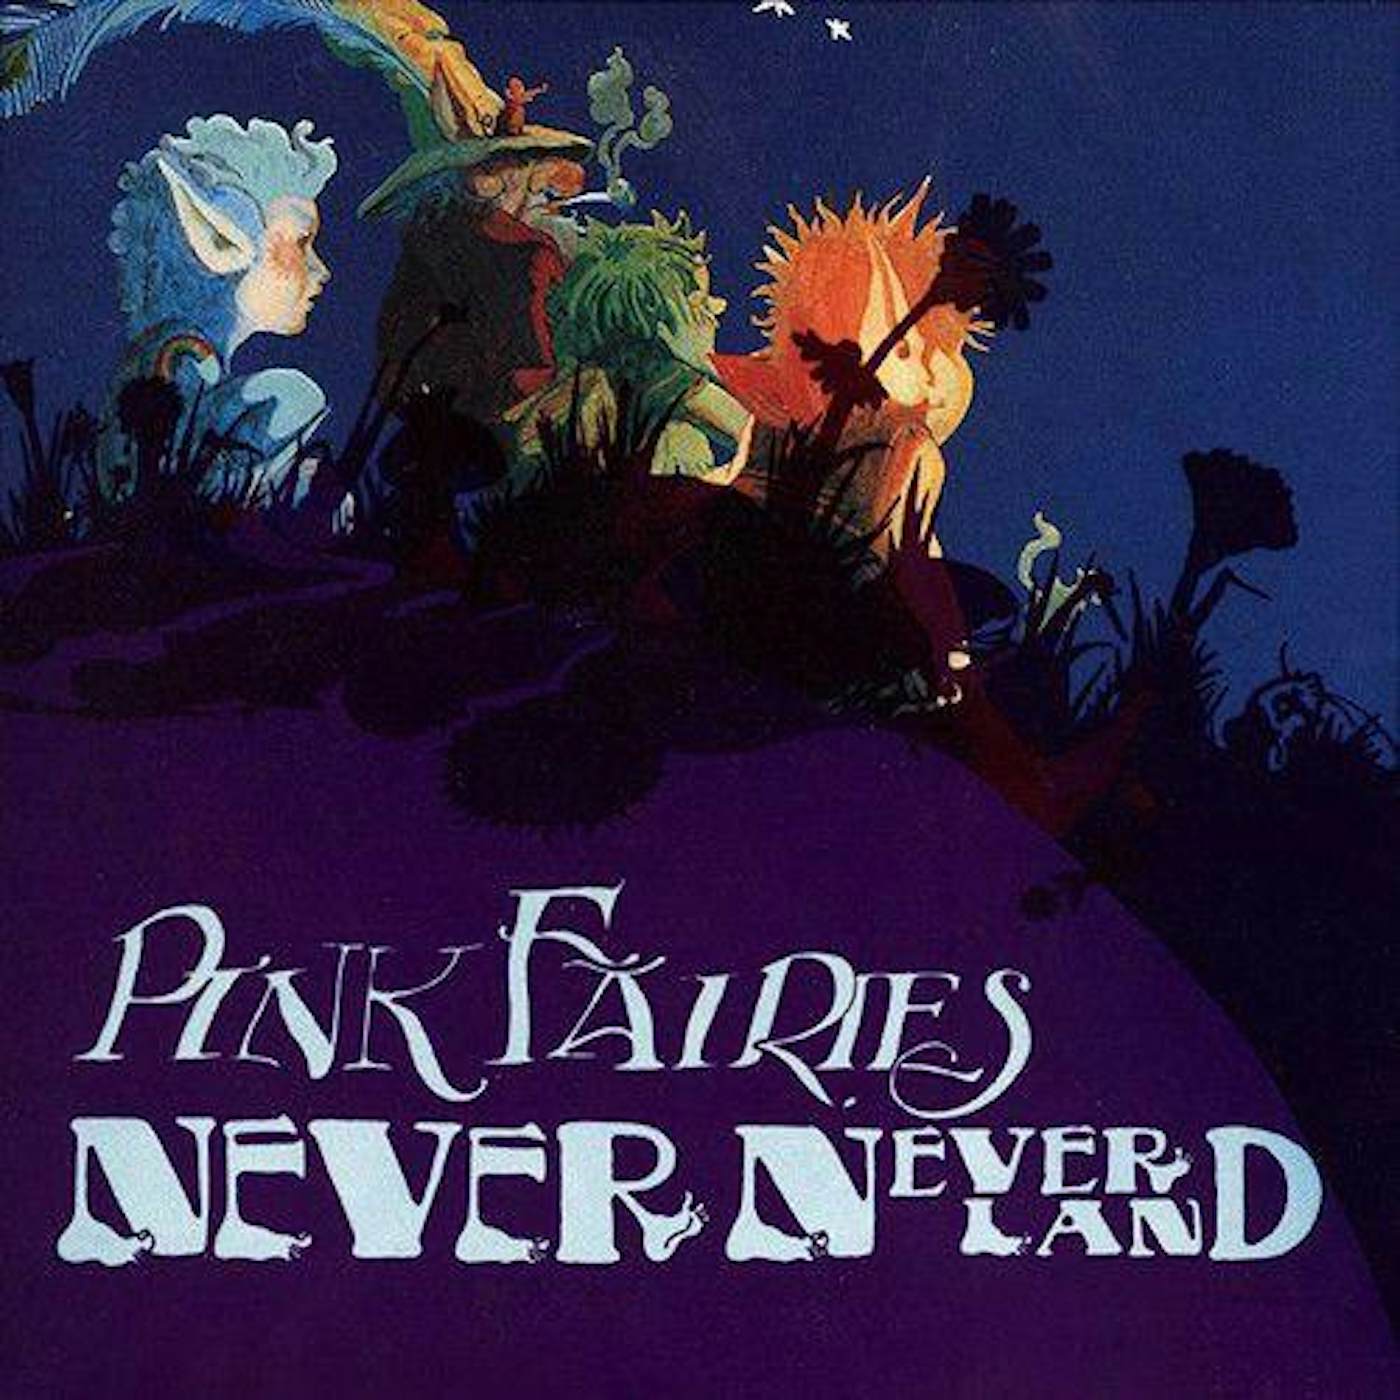 The Pink Fairies Neverneverland Vinyl Record